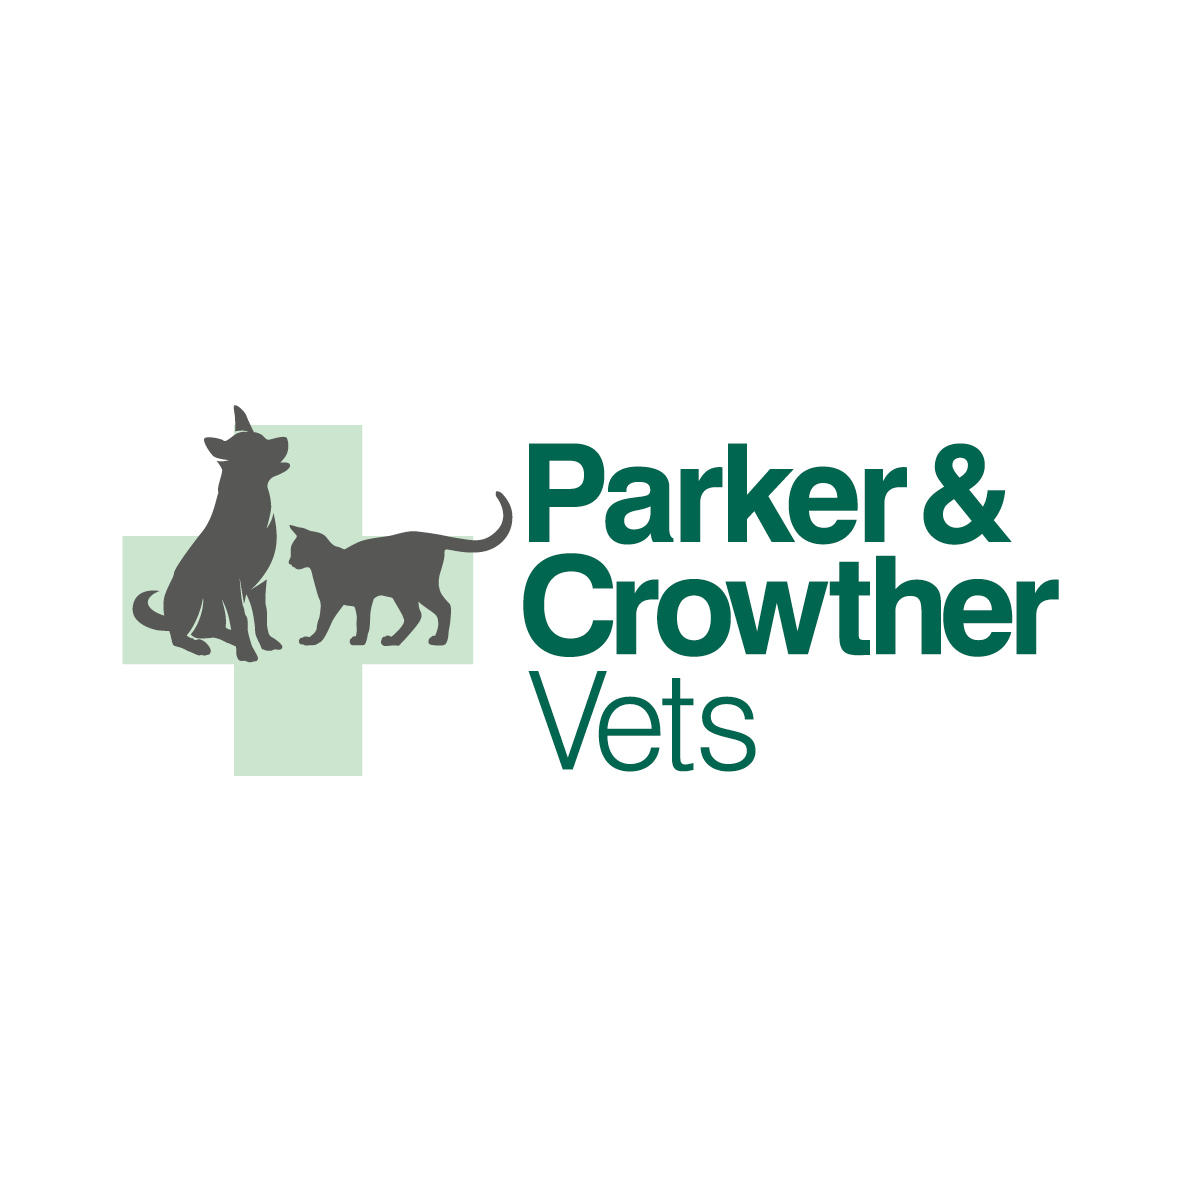 Parker & Crowther Vets, Churchside - Southport, Merseyside PR9 8PB - 01704 225105 | ShowMeLocal.com